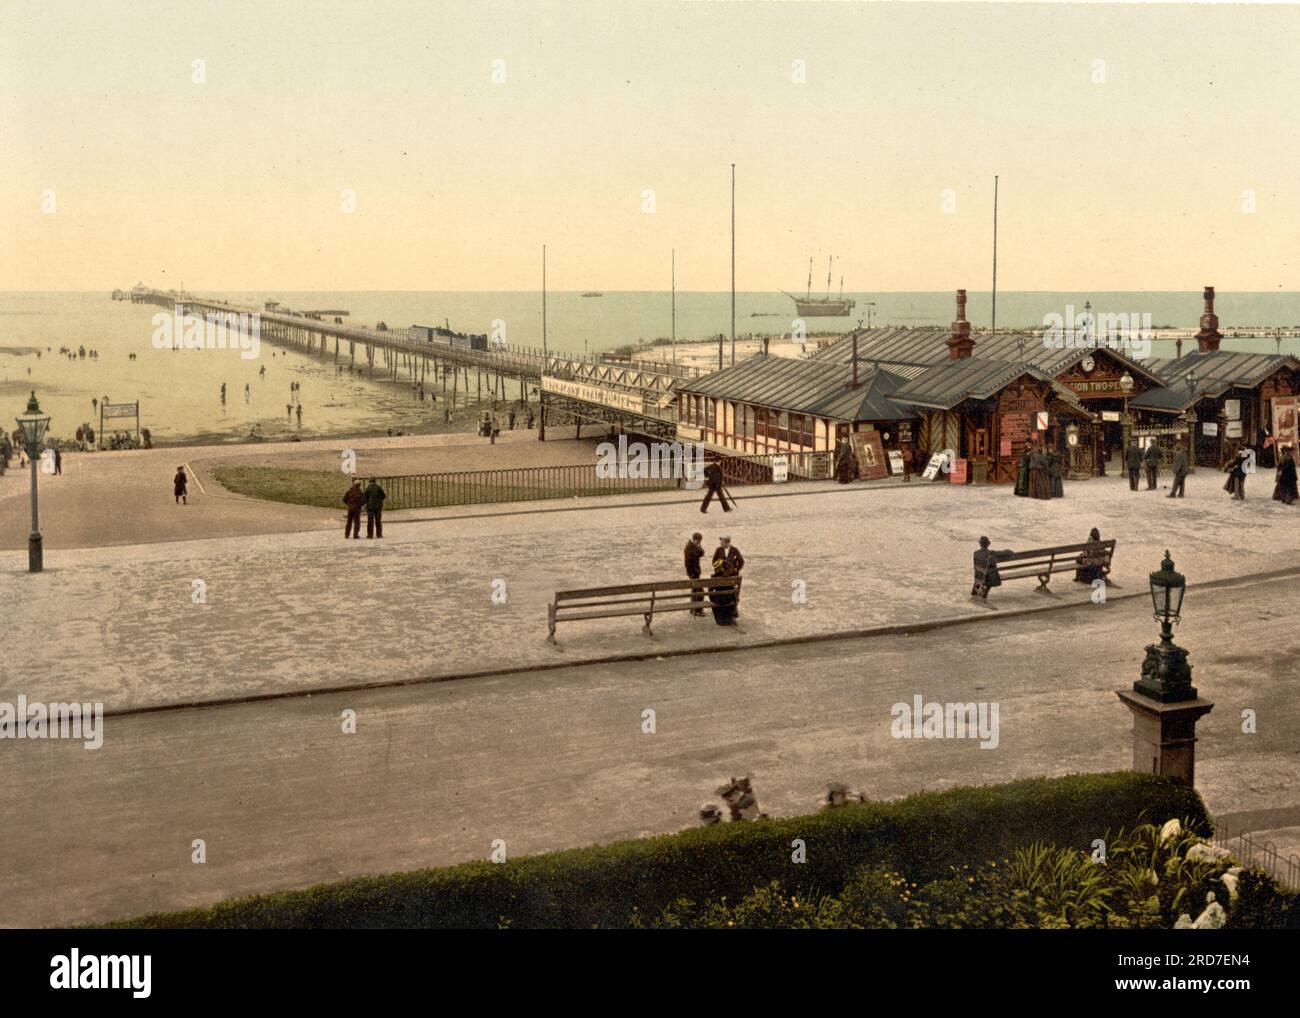 The pier, Southport, a seaside town in the Metropolitan Borough of Sefton in Merseyside, England, 1895, Historical, digital improved reproduction of an old Photochrome print Stock Photo